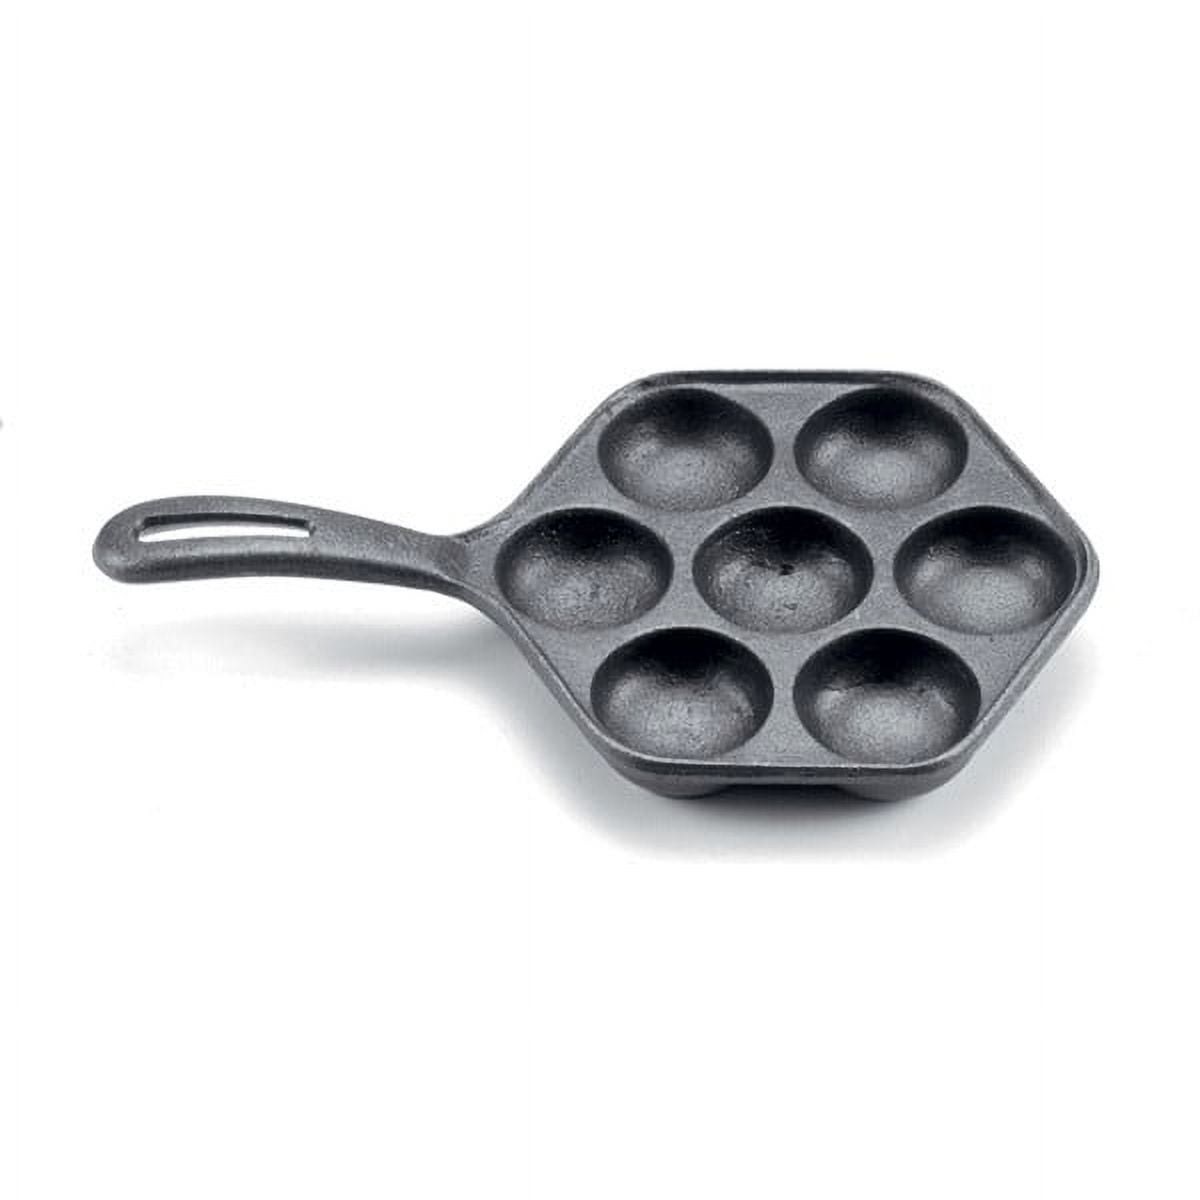  KitchenCraft KCDANPAN Aebleskiver Pan with 7 Holes and  Aebleskiver Recipe, Cast Iron, 20.5 cm, Black: Home & Kitchen